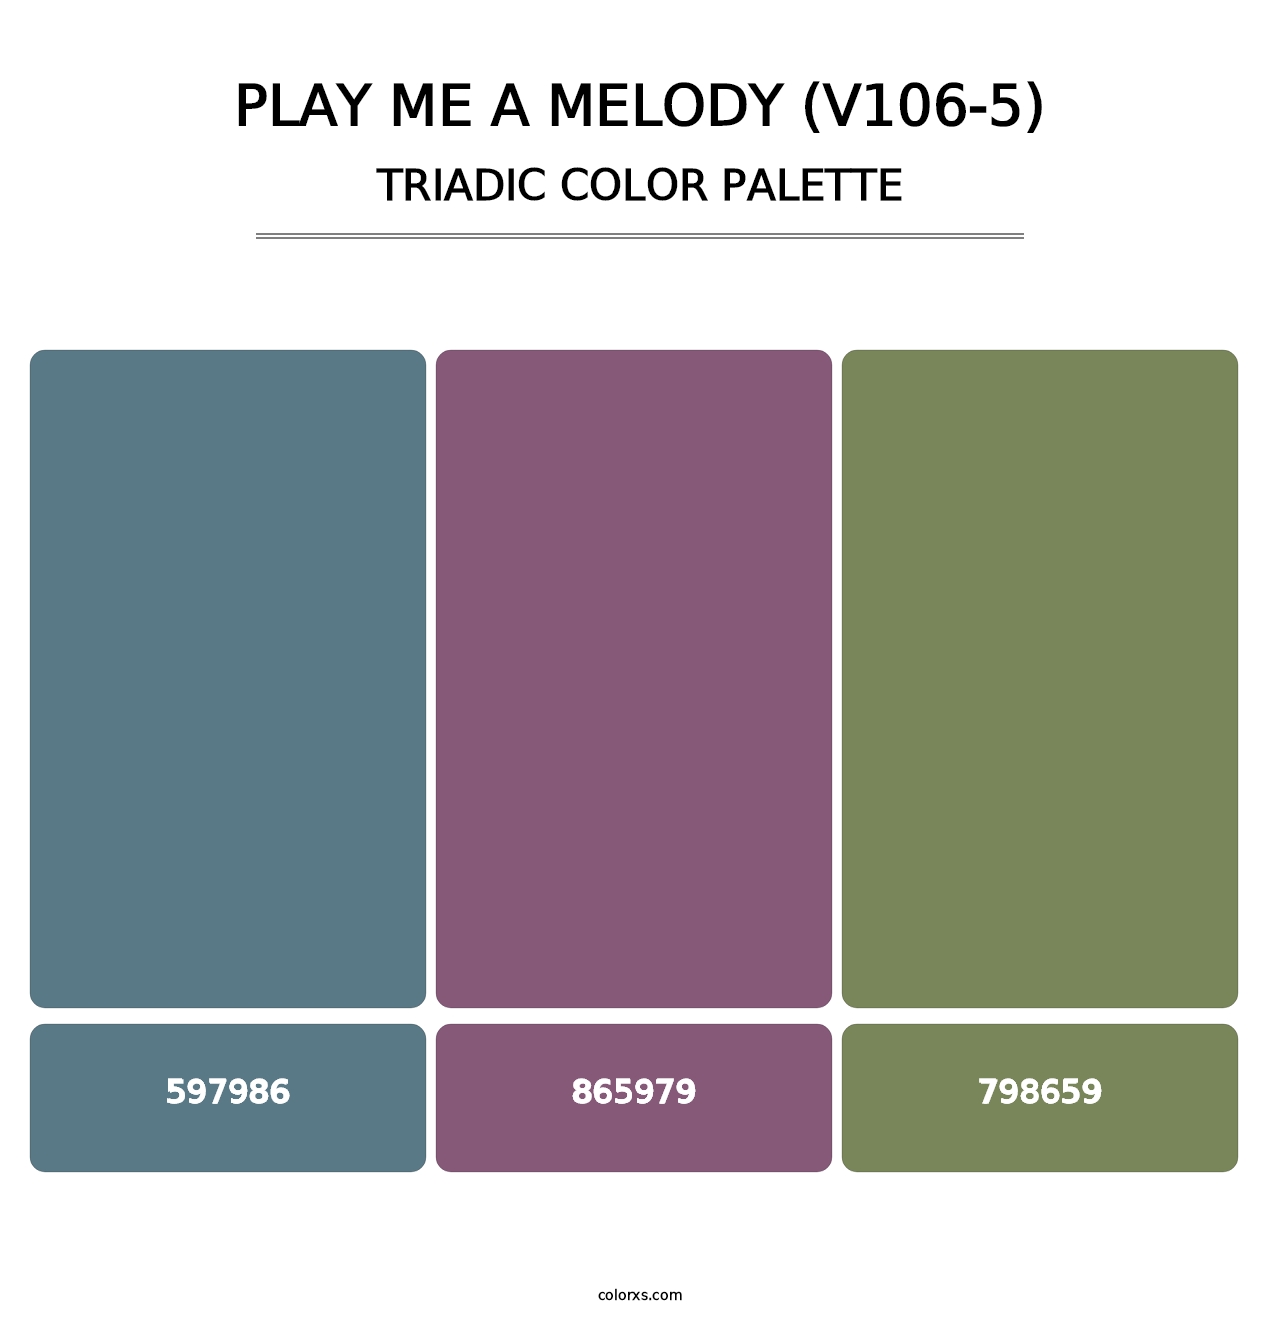 Play Me a Melody (V106-5) - Triadic Color Palette